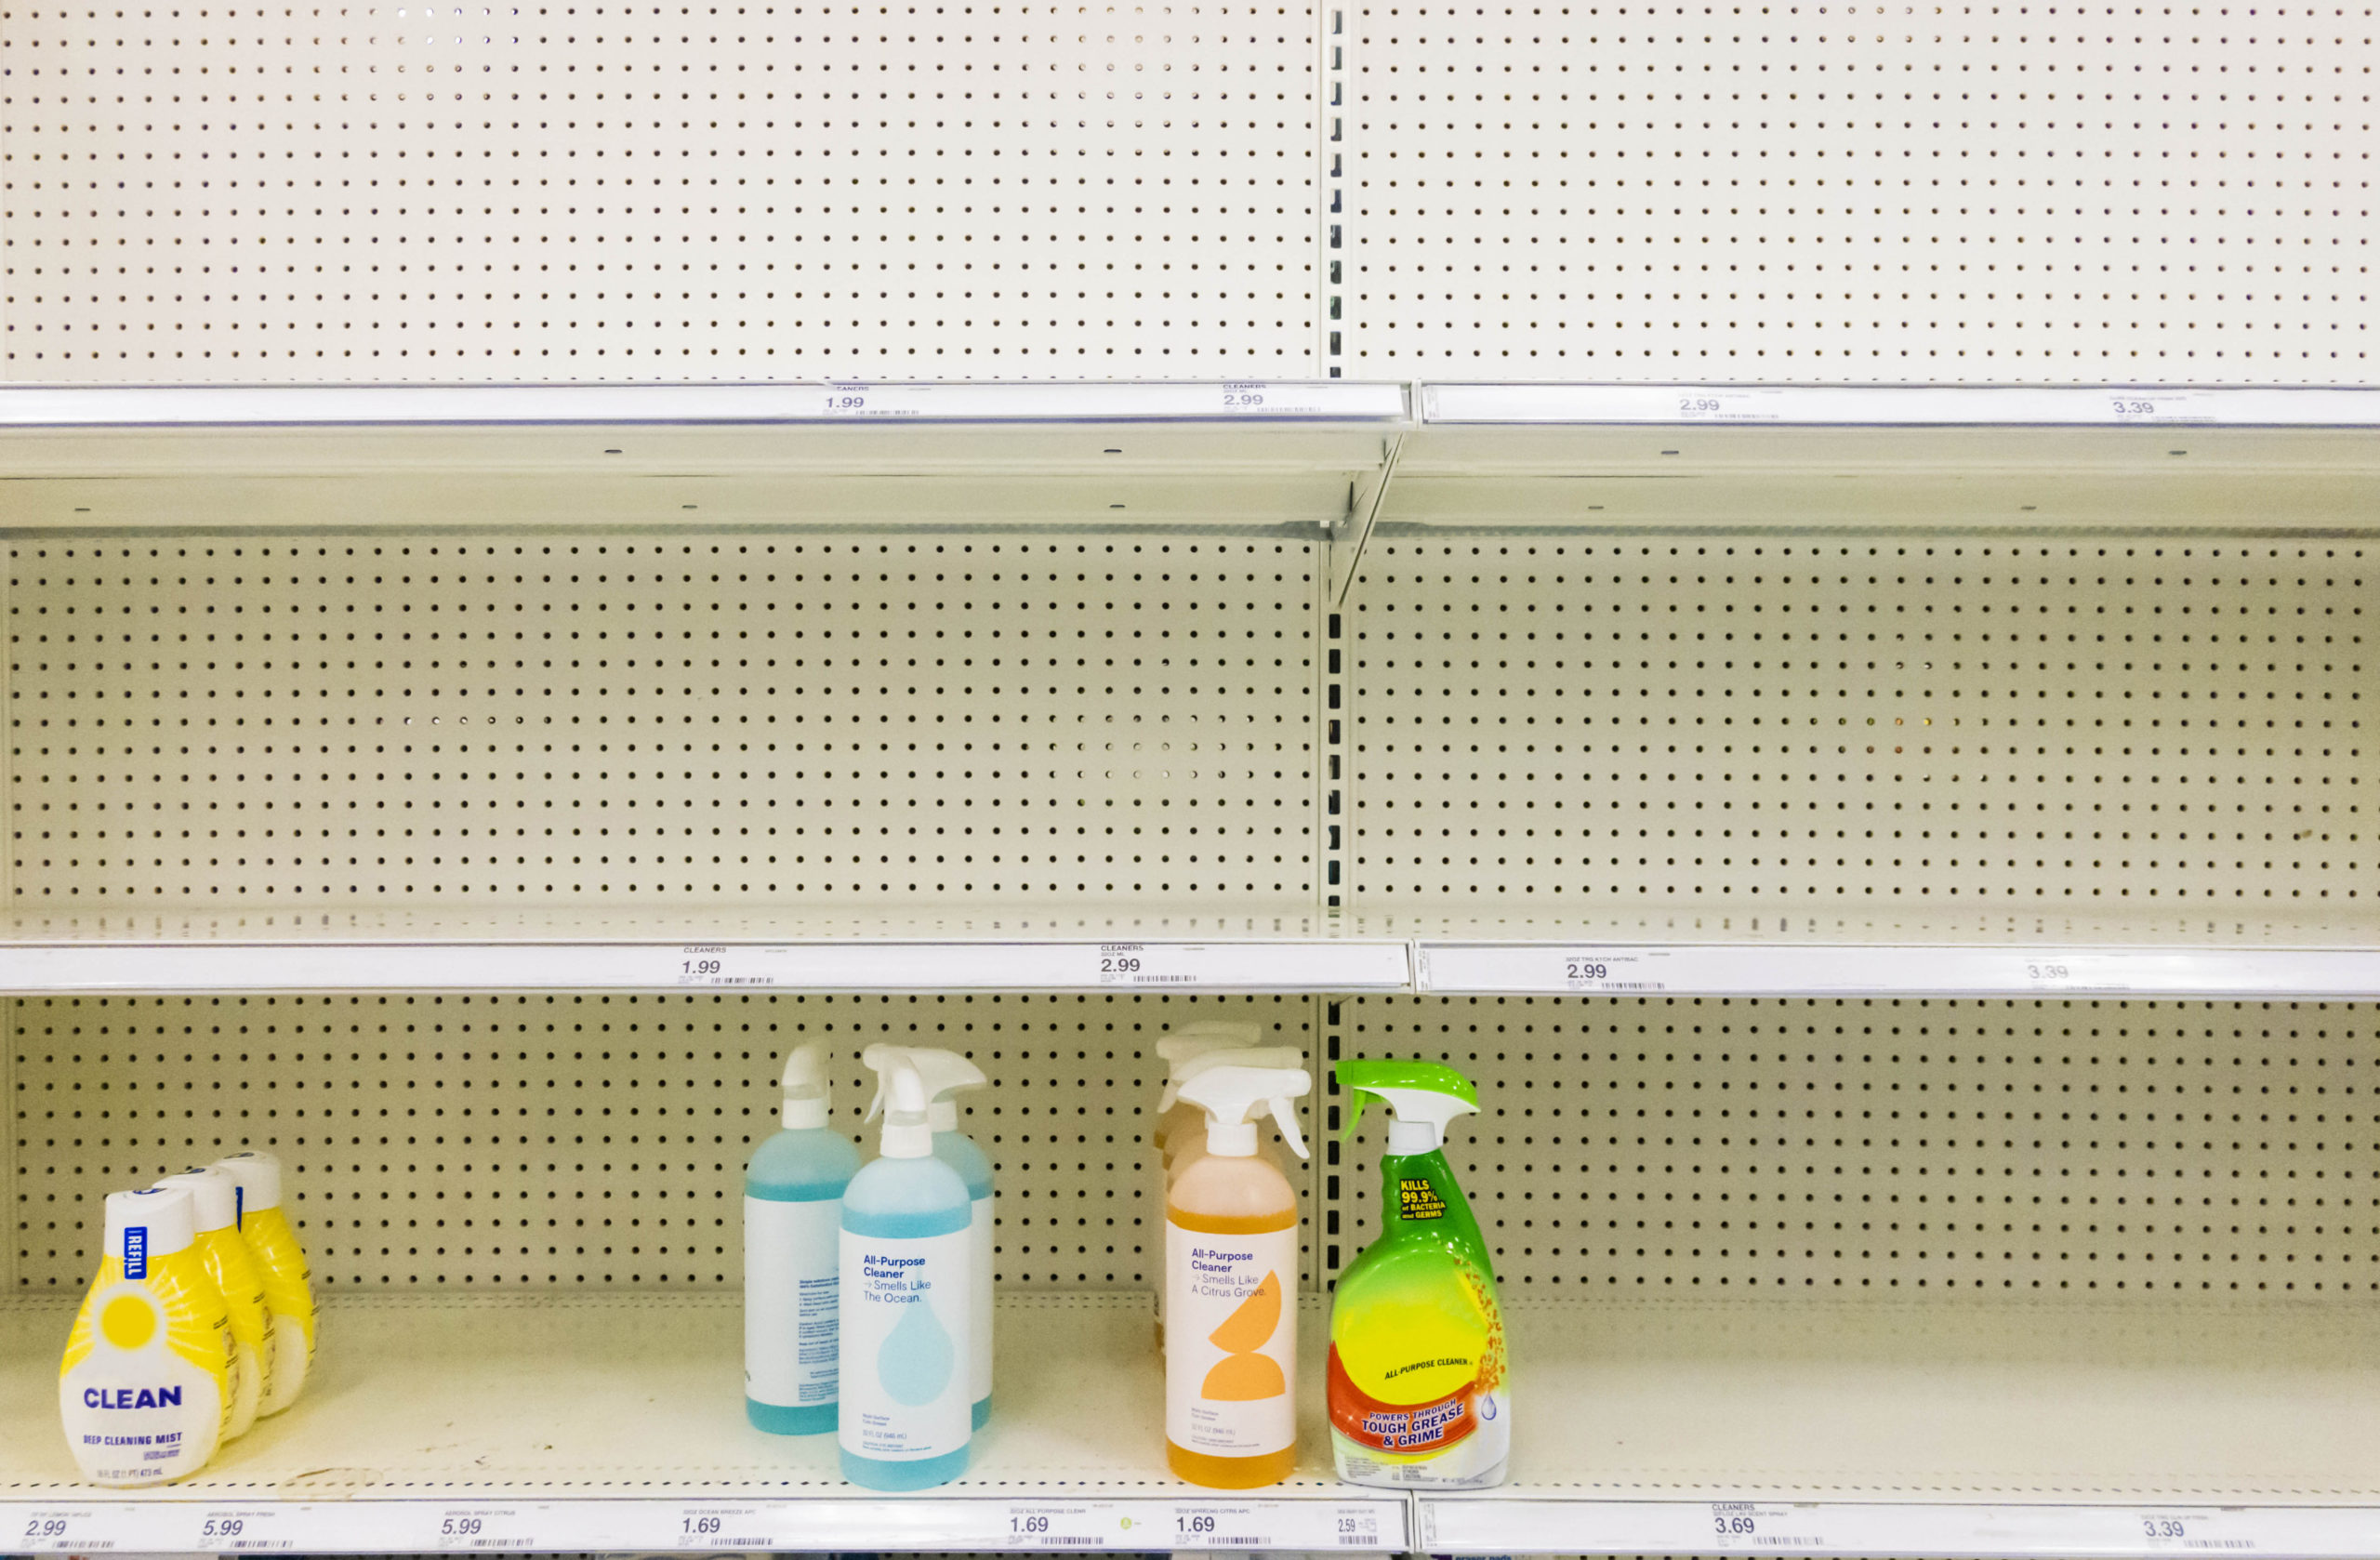 How to clean when faced with a shortage of supplies - For those having trouble finding well-known cleaning agents, these alternatives may suffice.